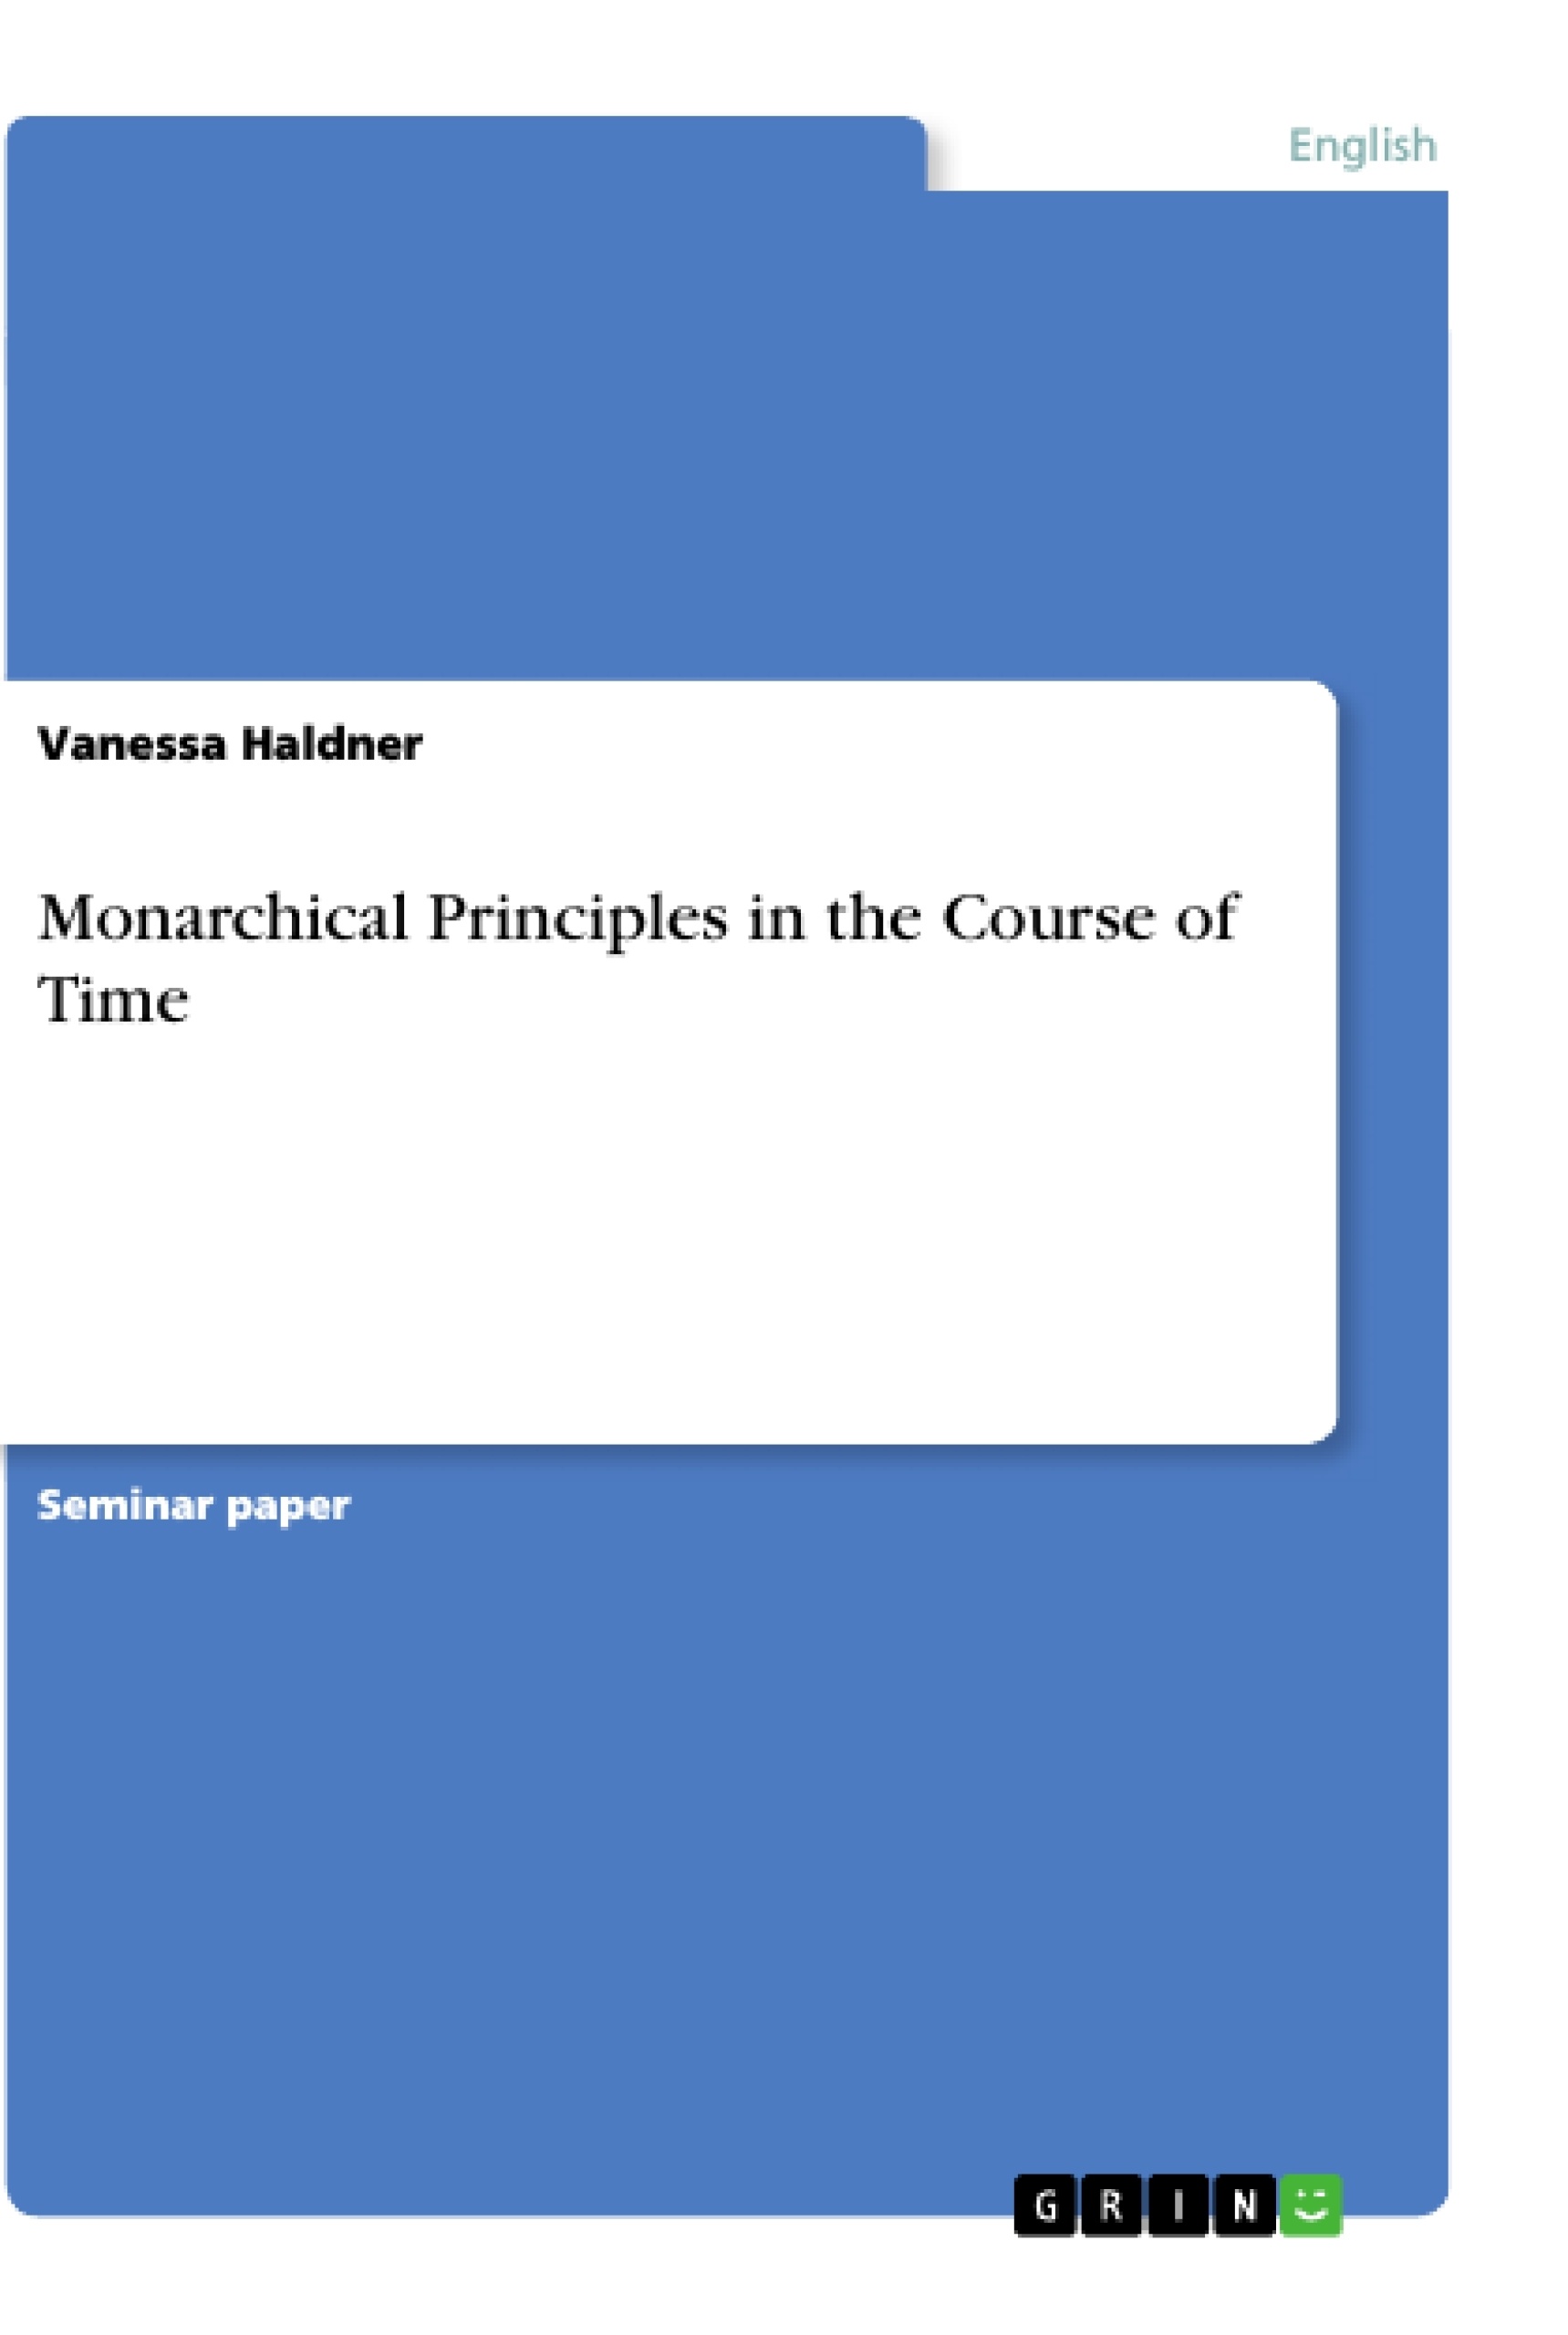 Título: Monarchical Principles in the Course of Time